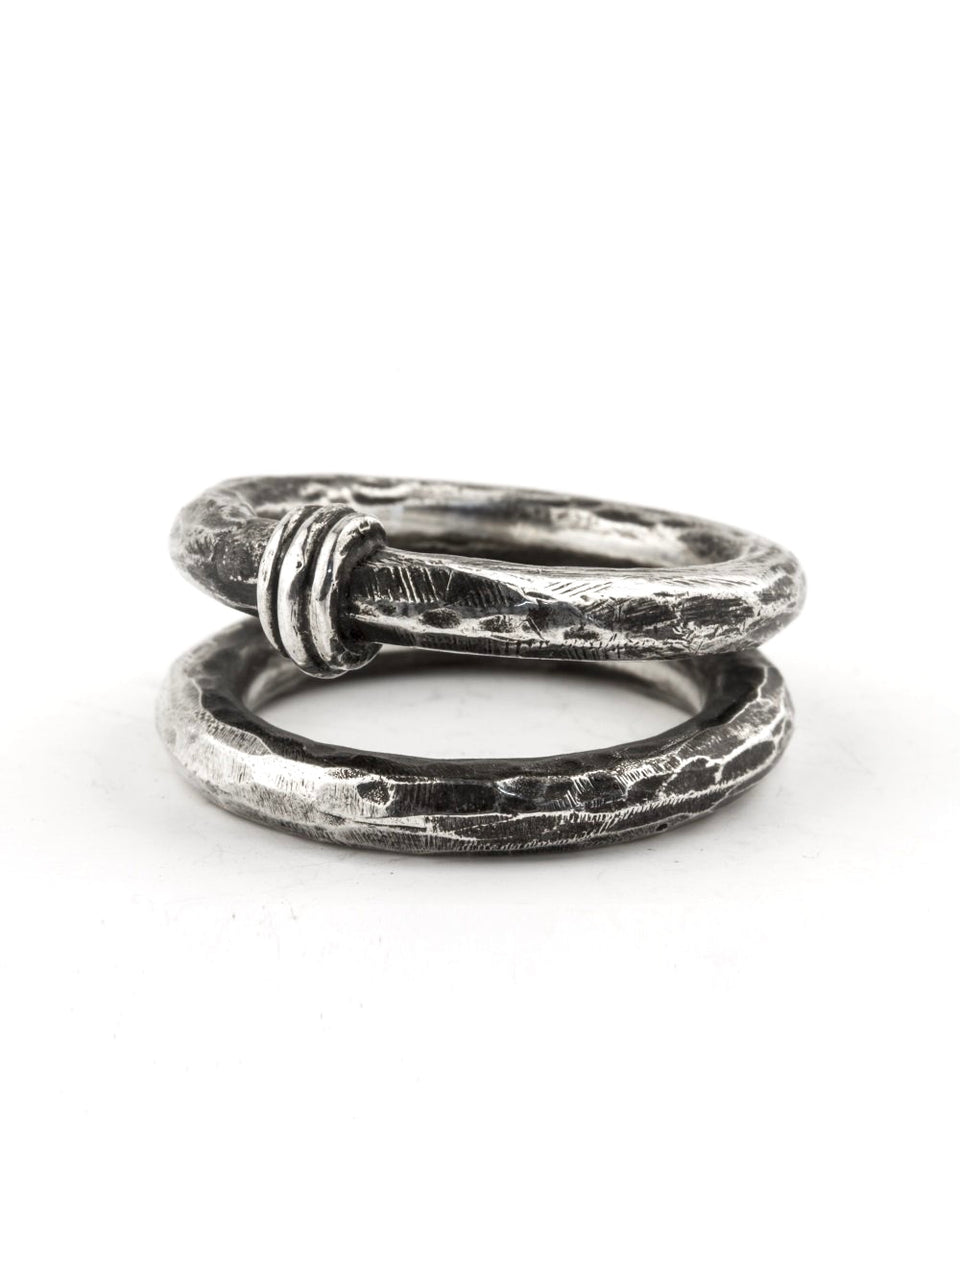 Henson Spine Double Ring